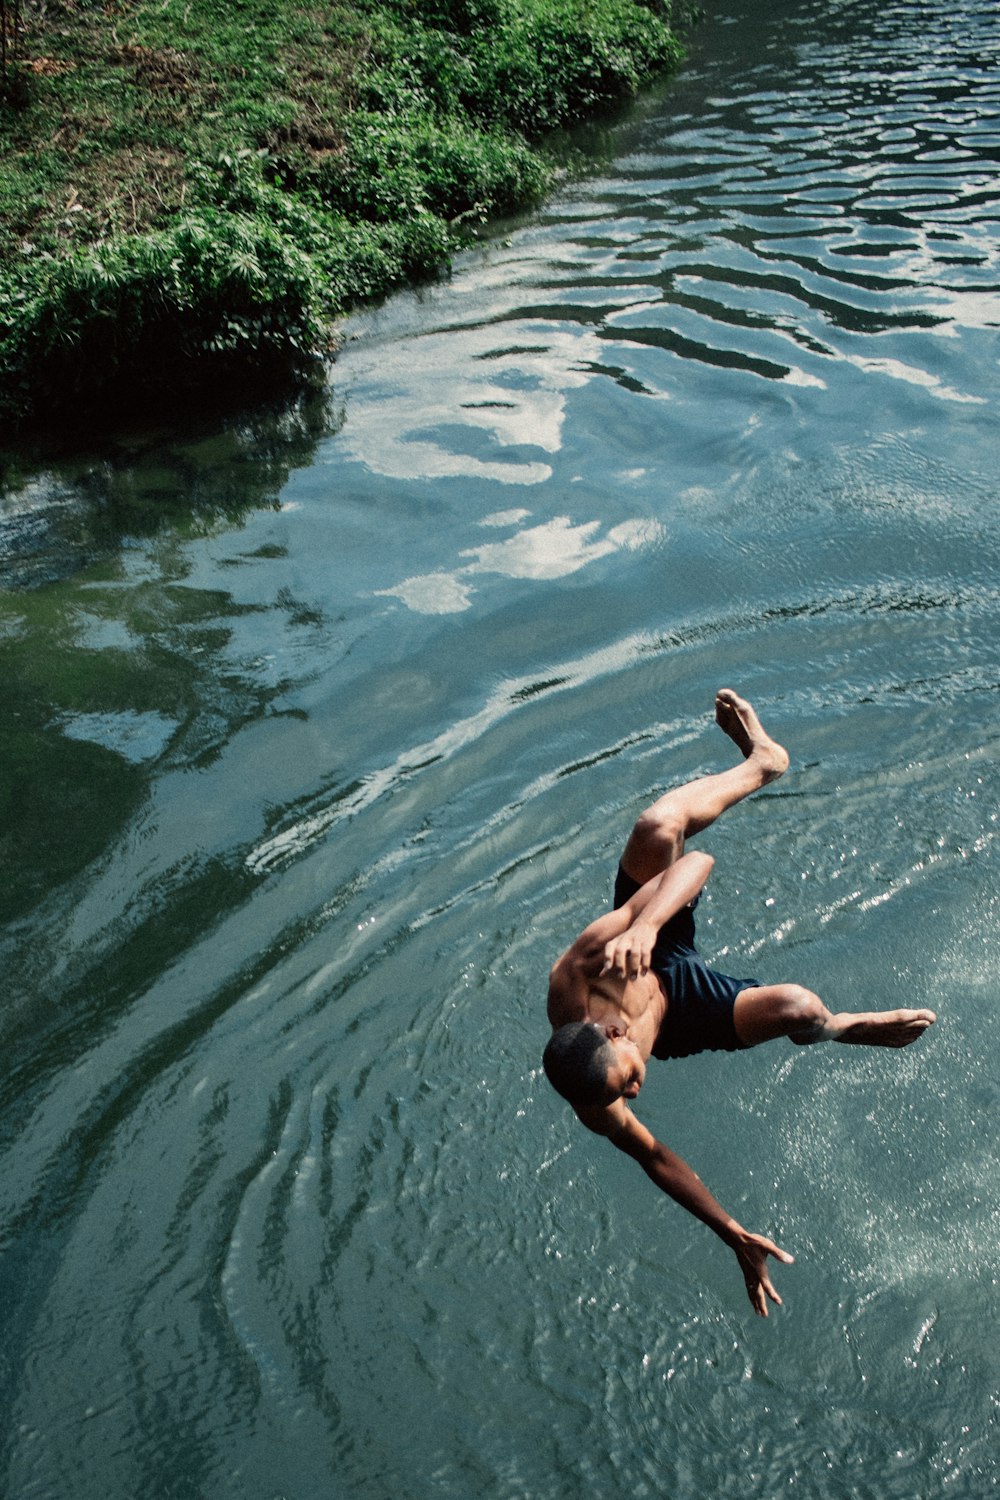 a person diving into a body of water